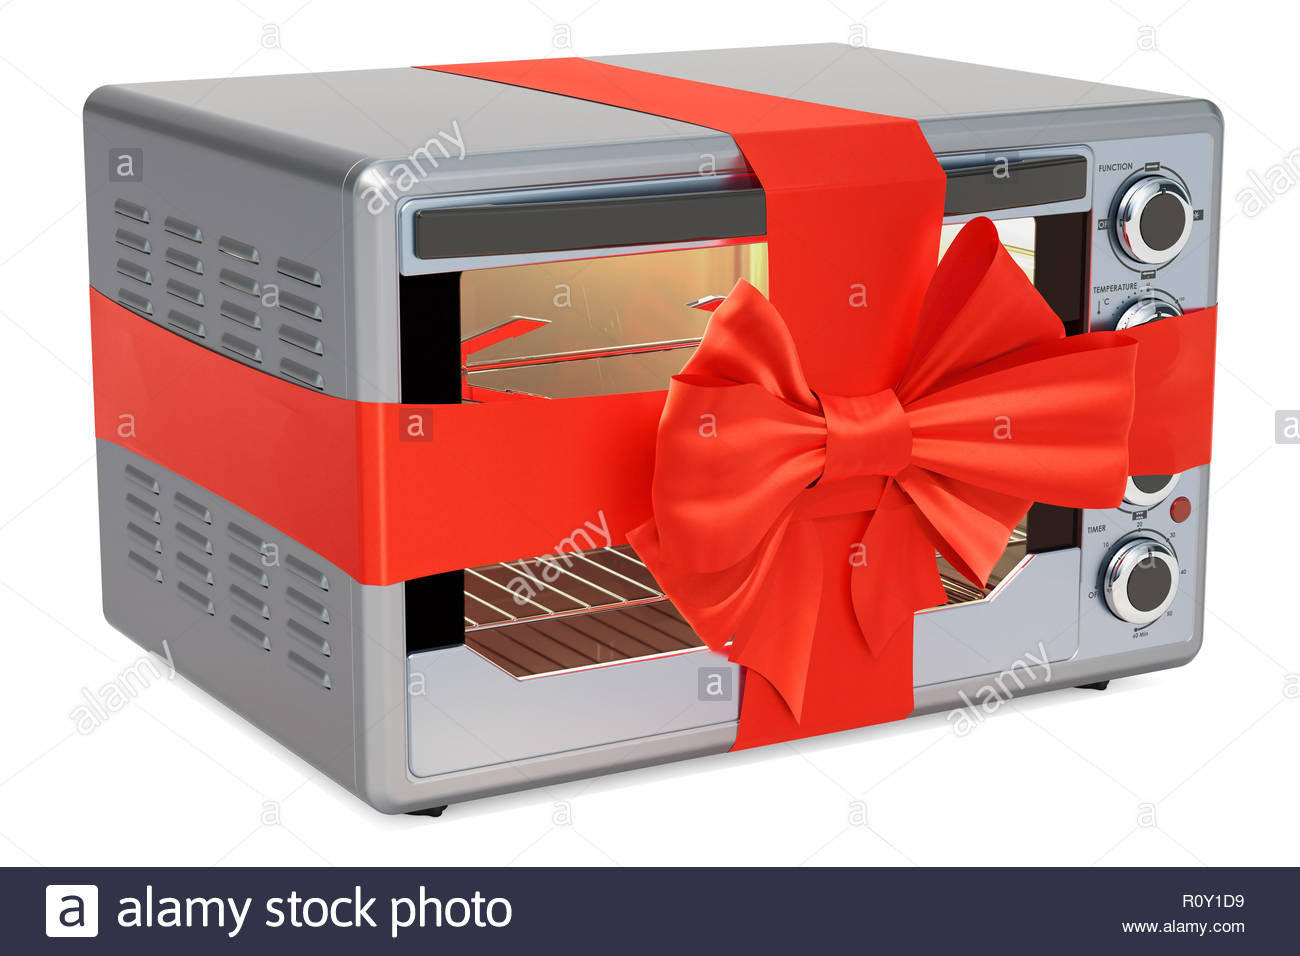 Convection Toaster Oven With Rotisserie And Grill Red Ribbon